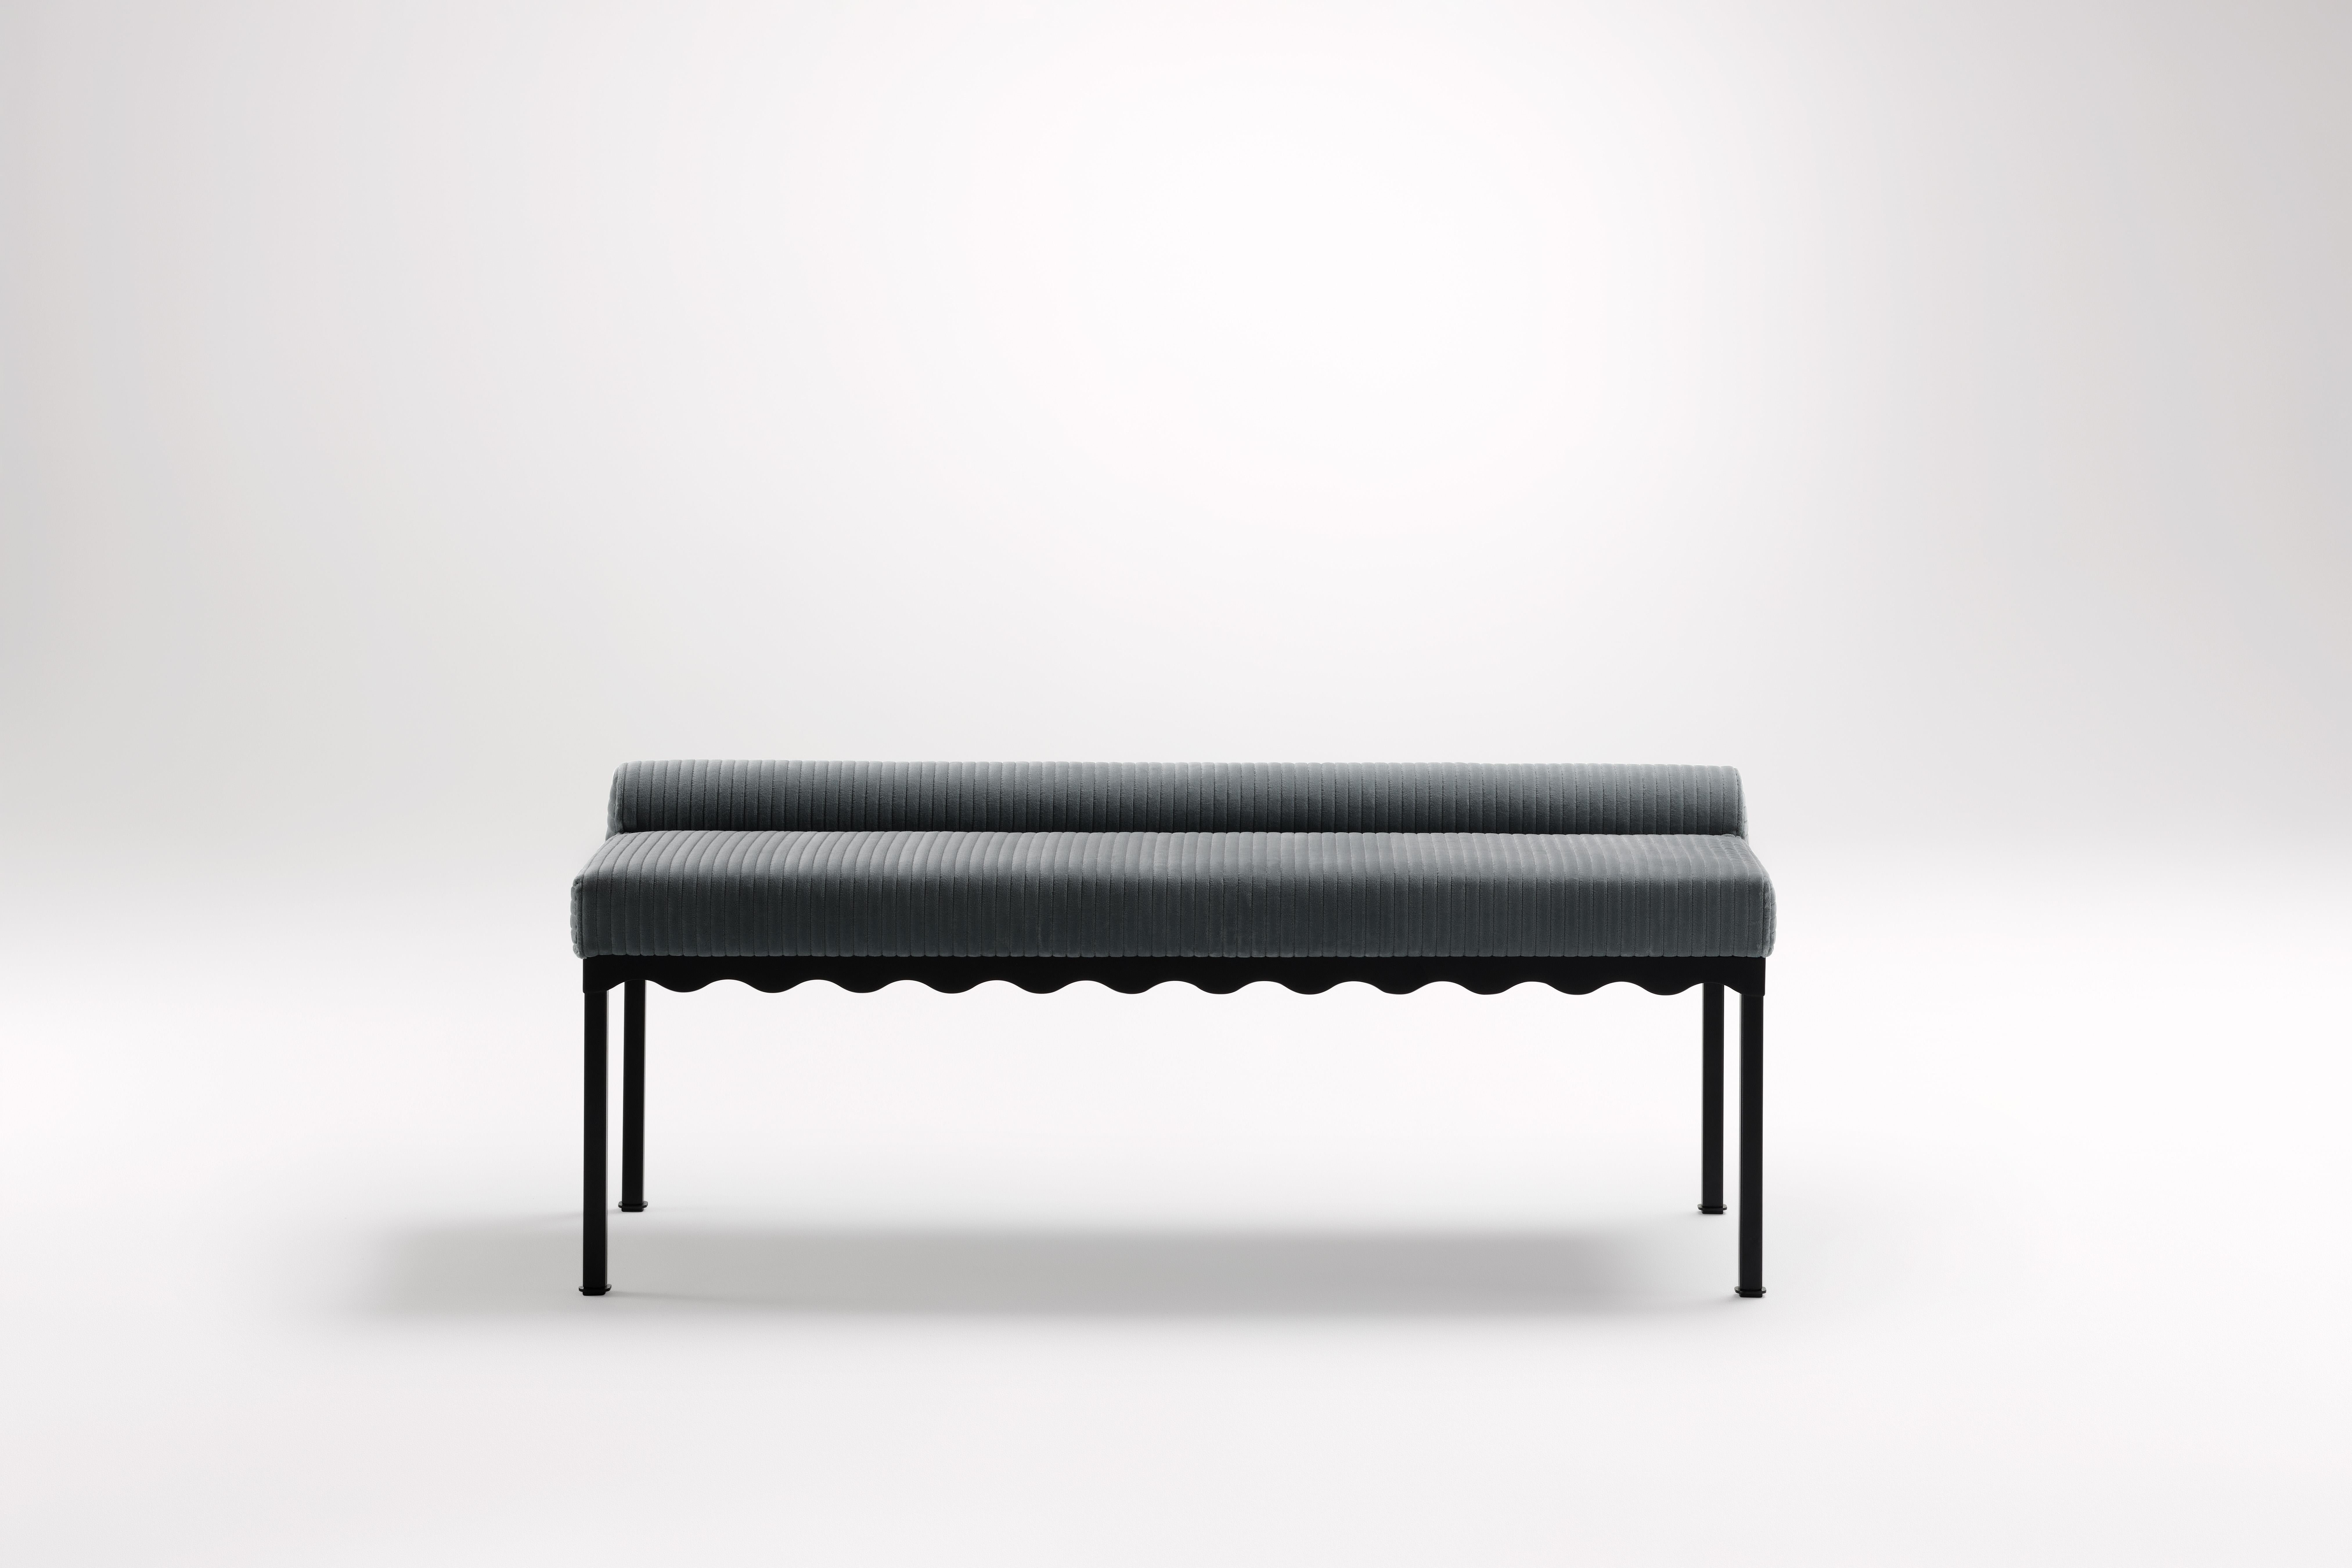 Marmoset Bellini 1340 Bench by Coco Flip
Dimensions: D 134 x W 54 x H 52.5 cm
Materials: Timber / Upholstered tops, Powder-coated steel frame. 
Weight: 20 kg
Frame Finishes: Textura Black.

Coco Flip is a Melbourne based furniture and lighting